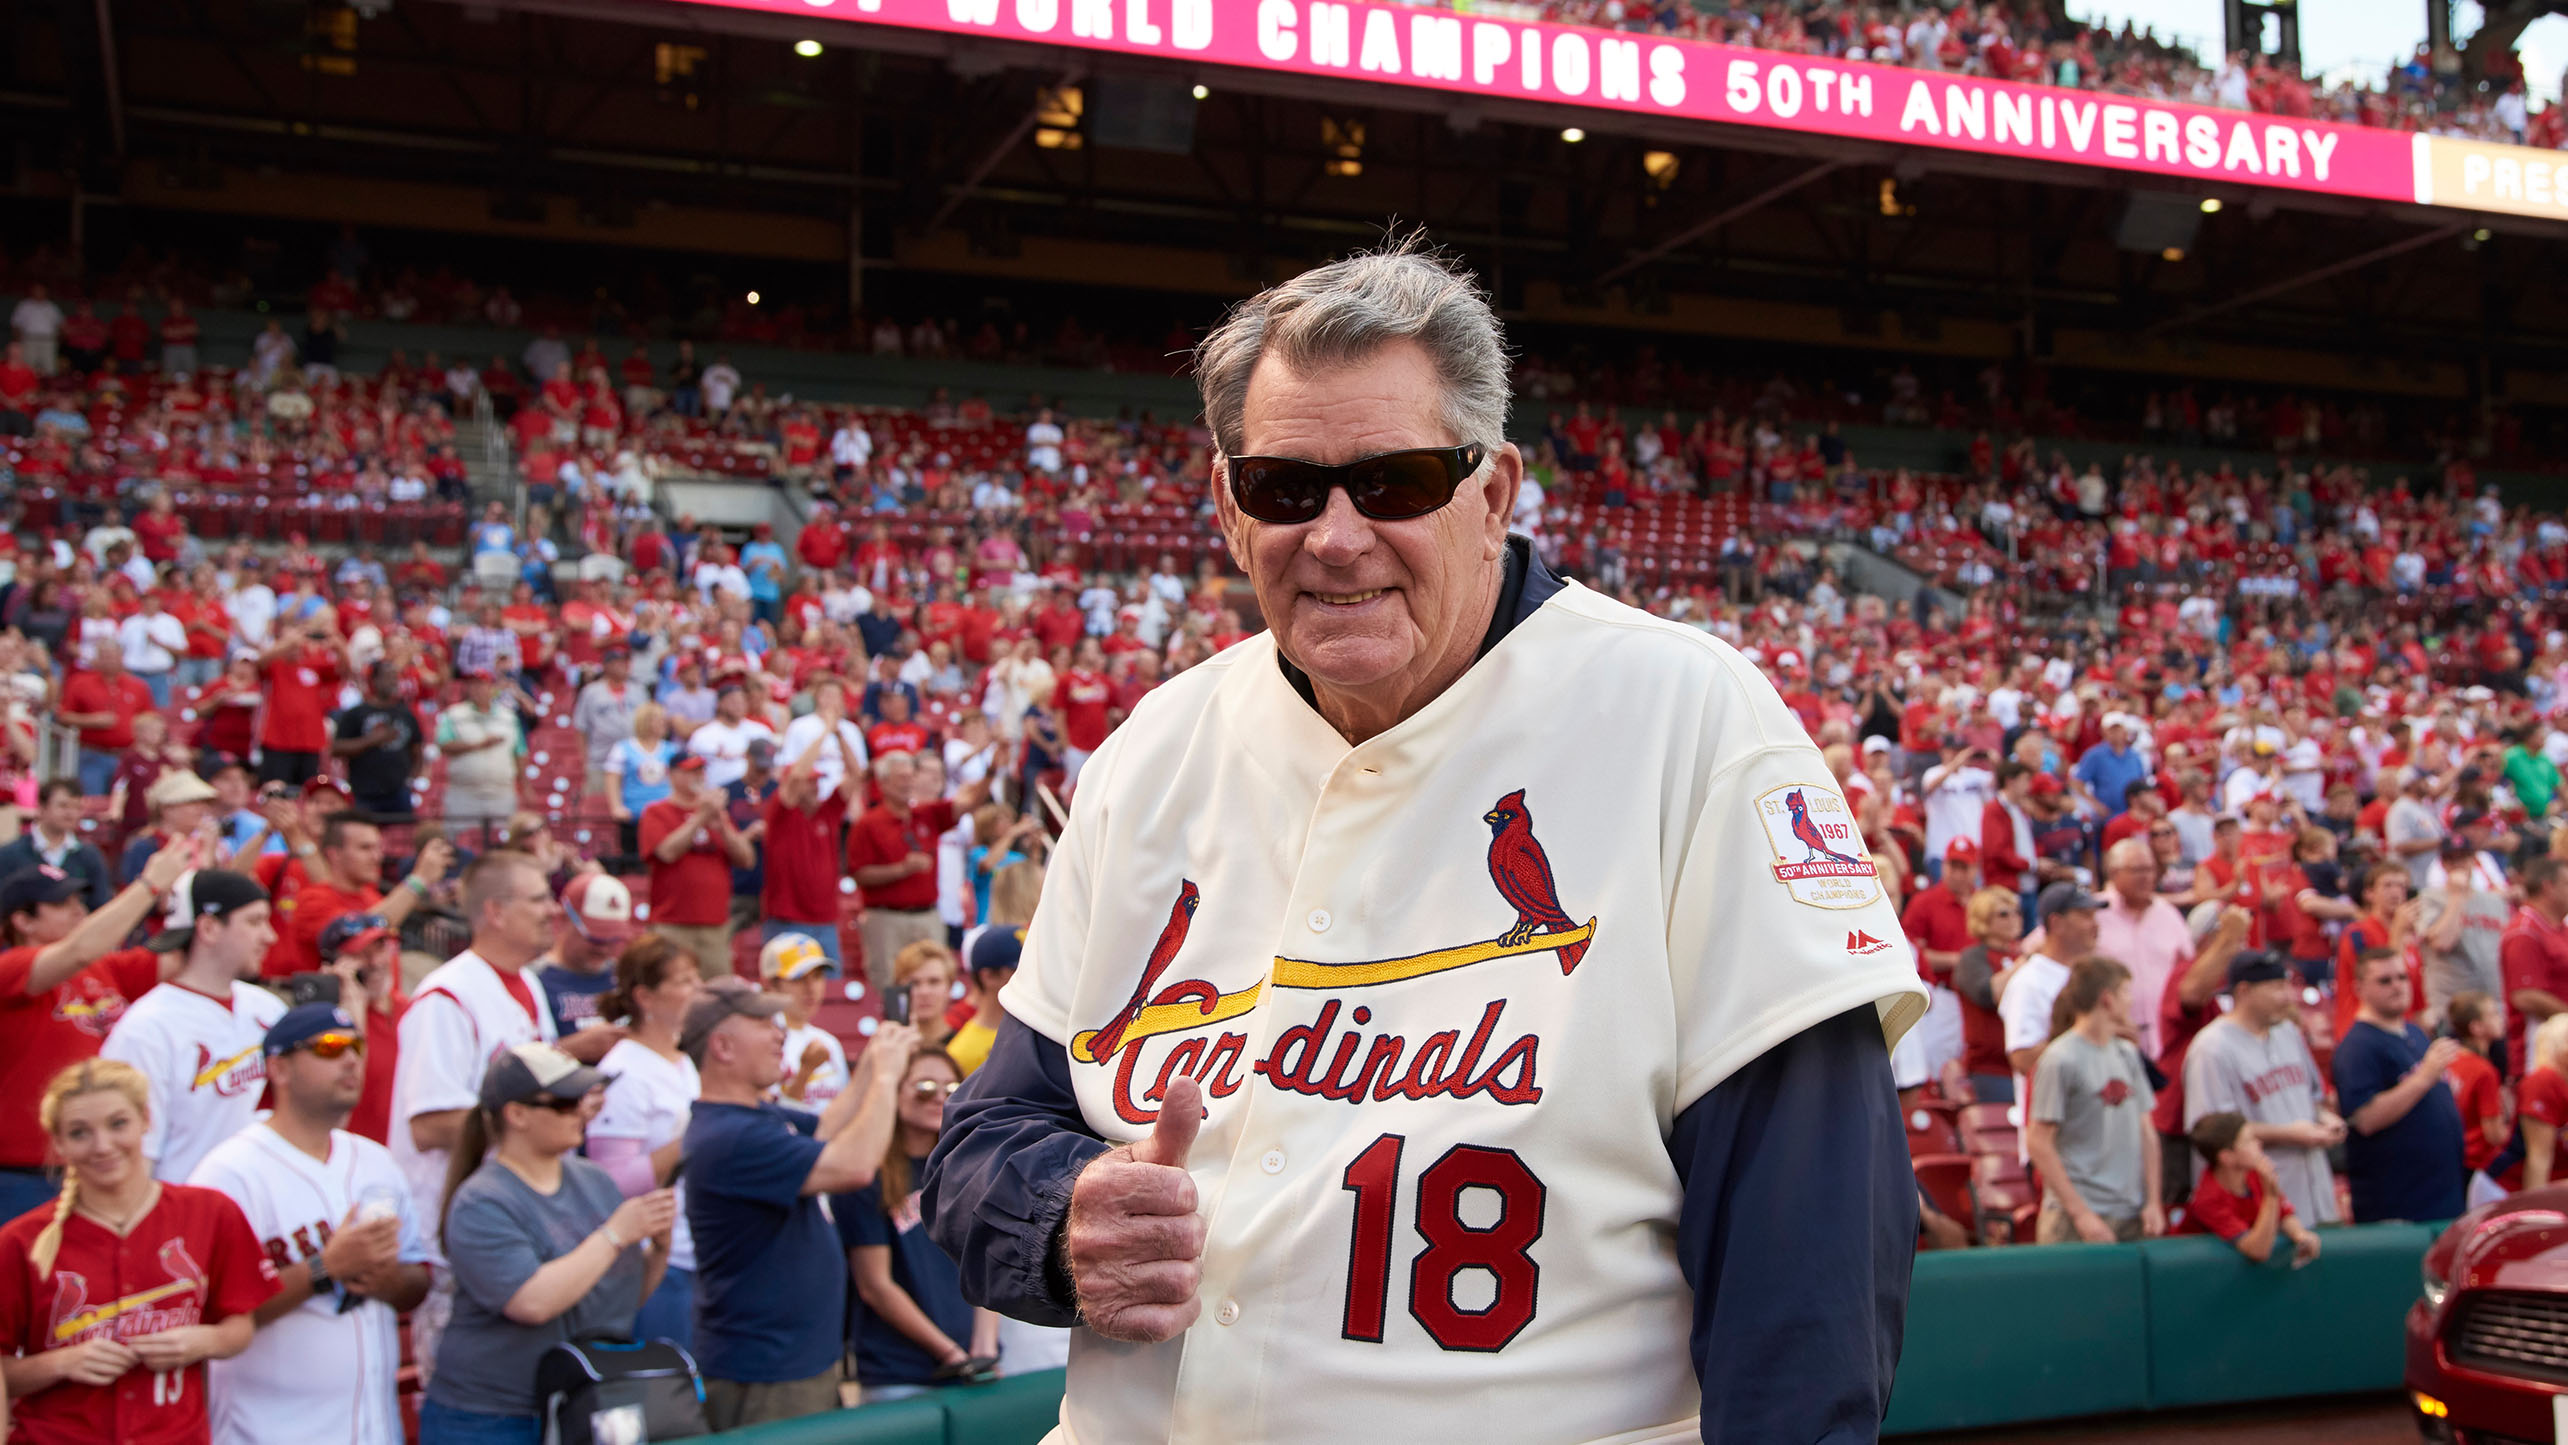 Cardinals broadcaster Mike Shannon battled COVID last year